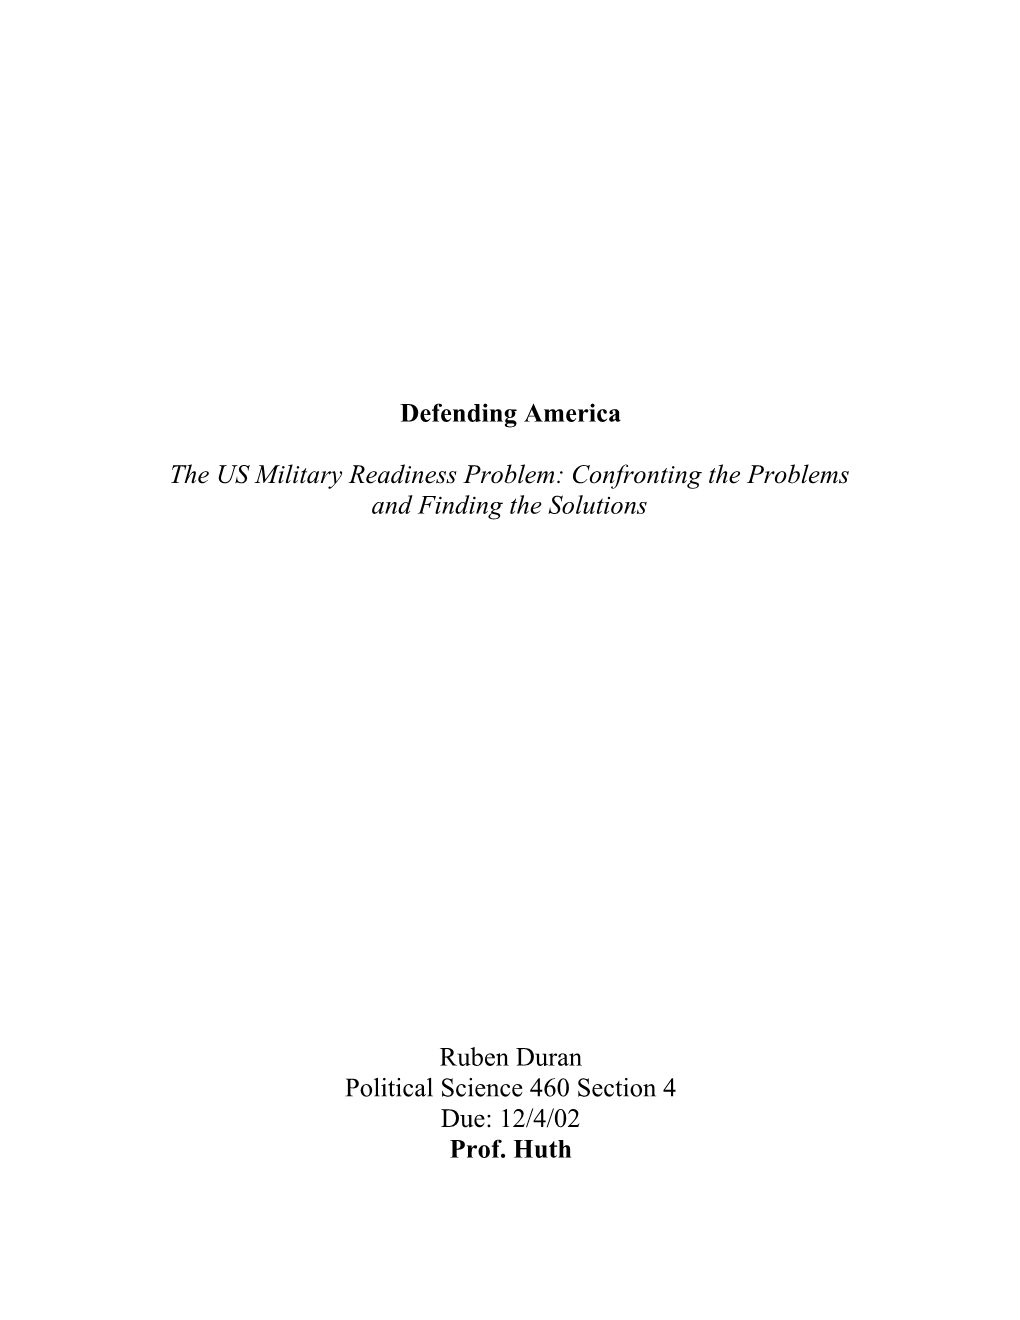 The US Military Readiness Problem: Confronting the Problems and Finding the Solutions